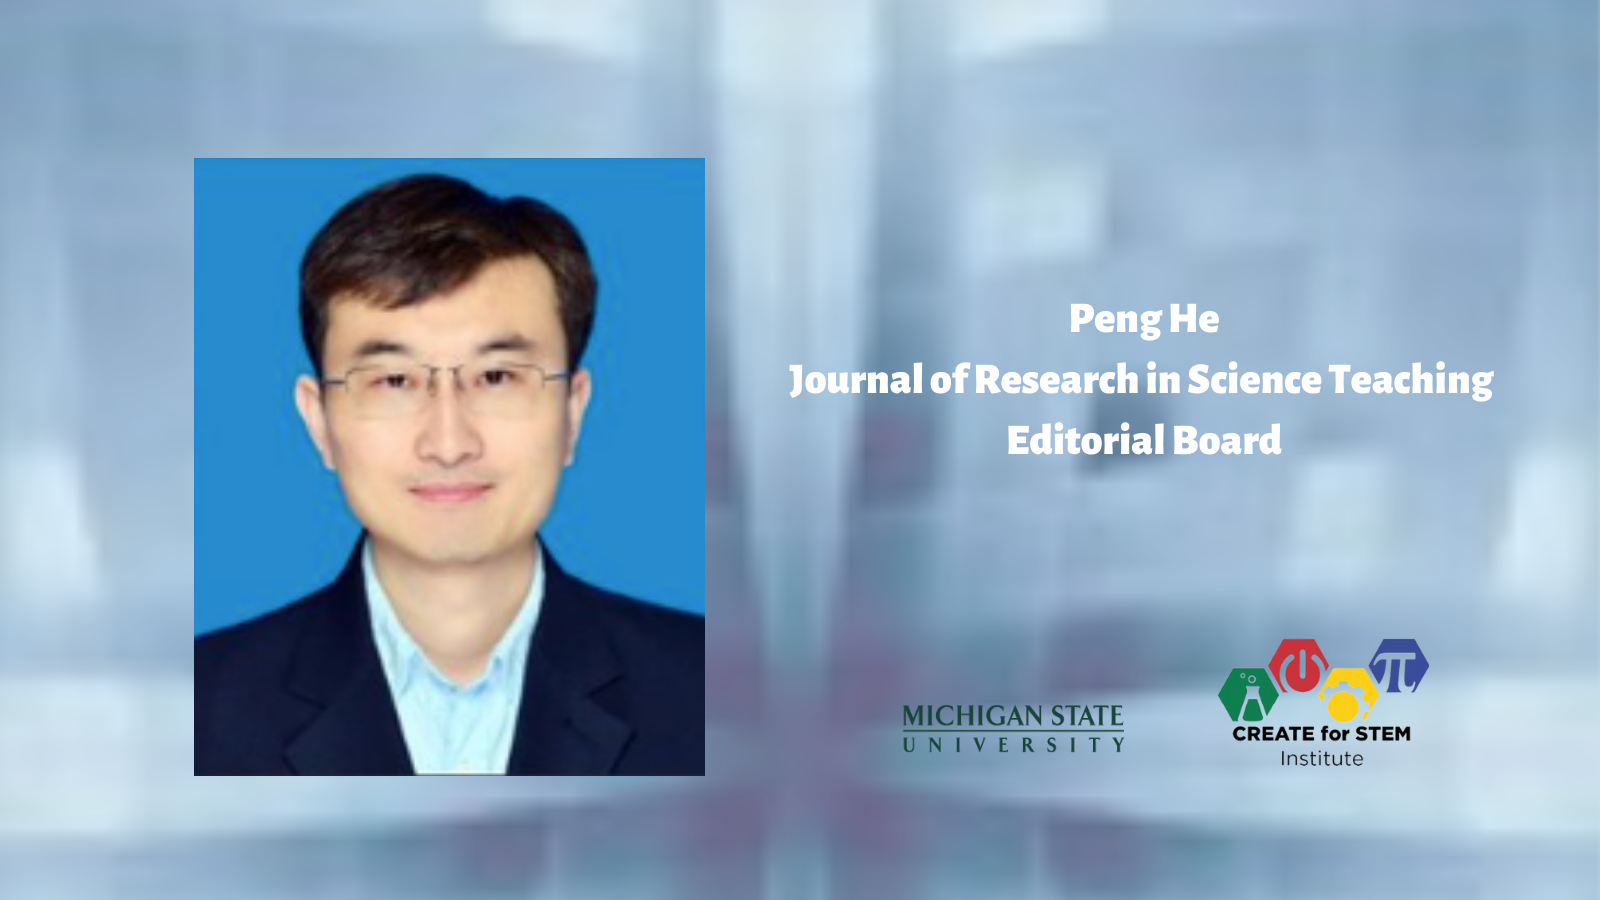 Peng He, Journal of Research in Science Teaching, Editorial Board, photo of Peng